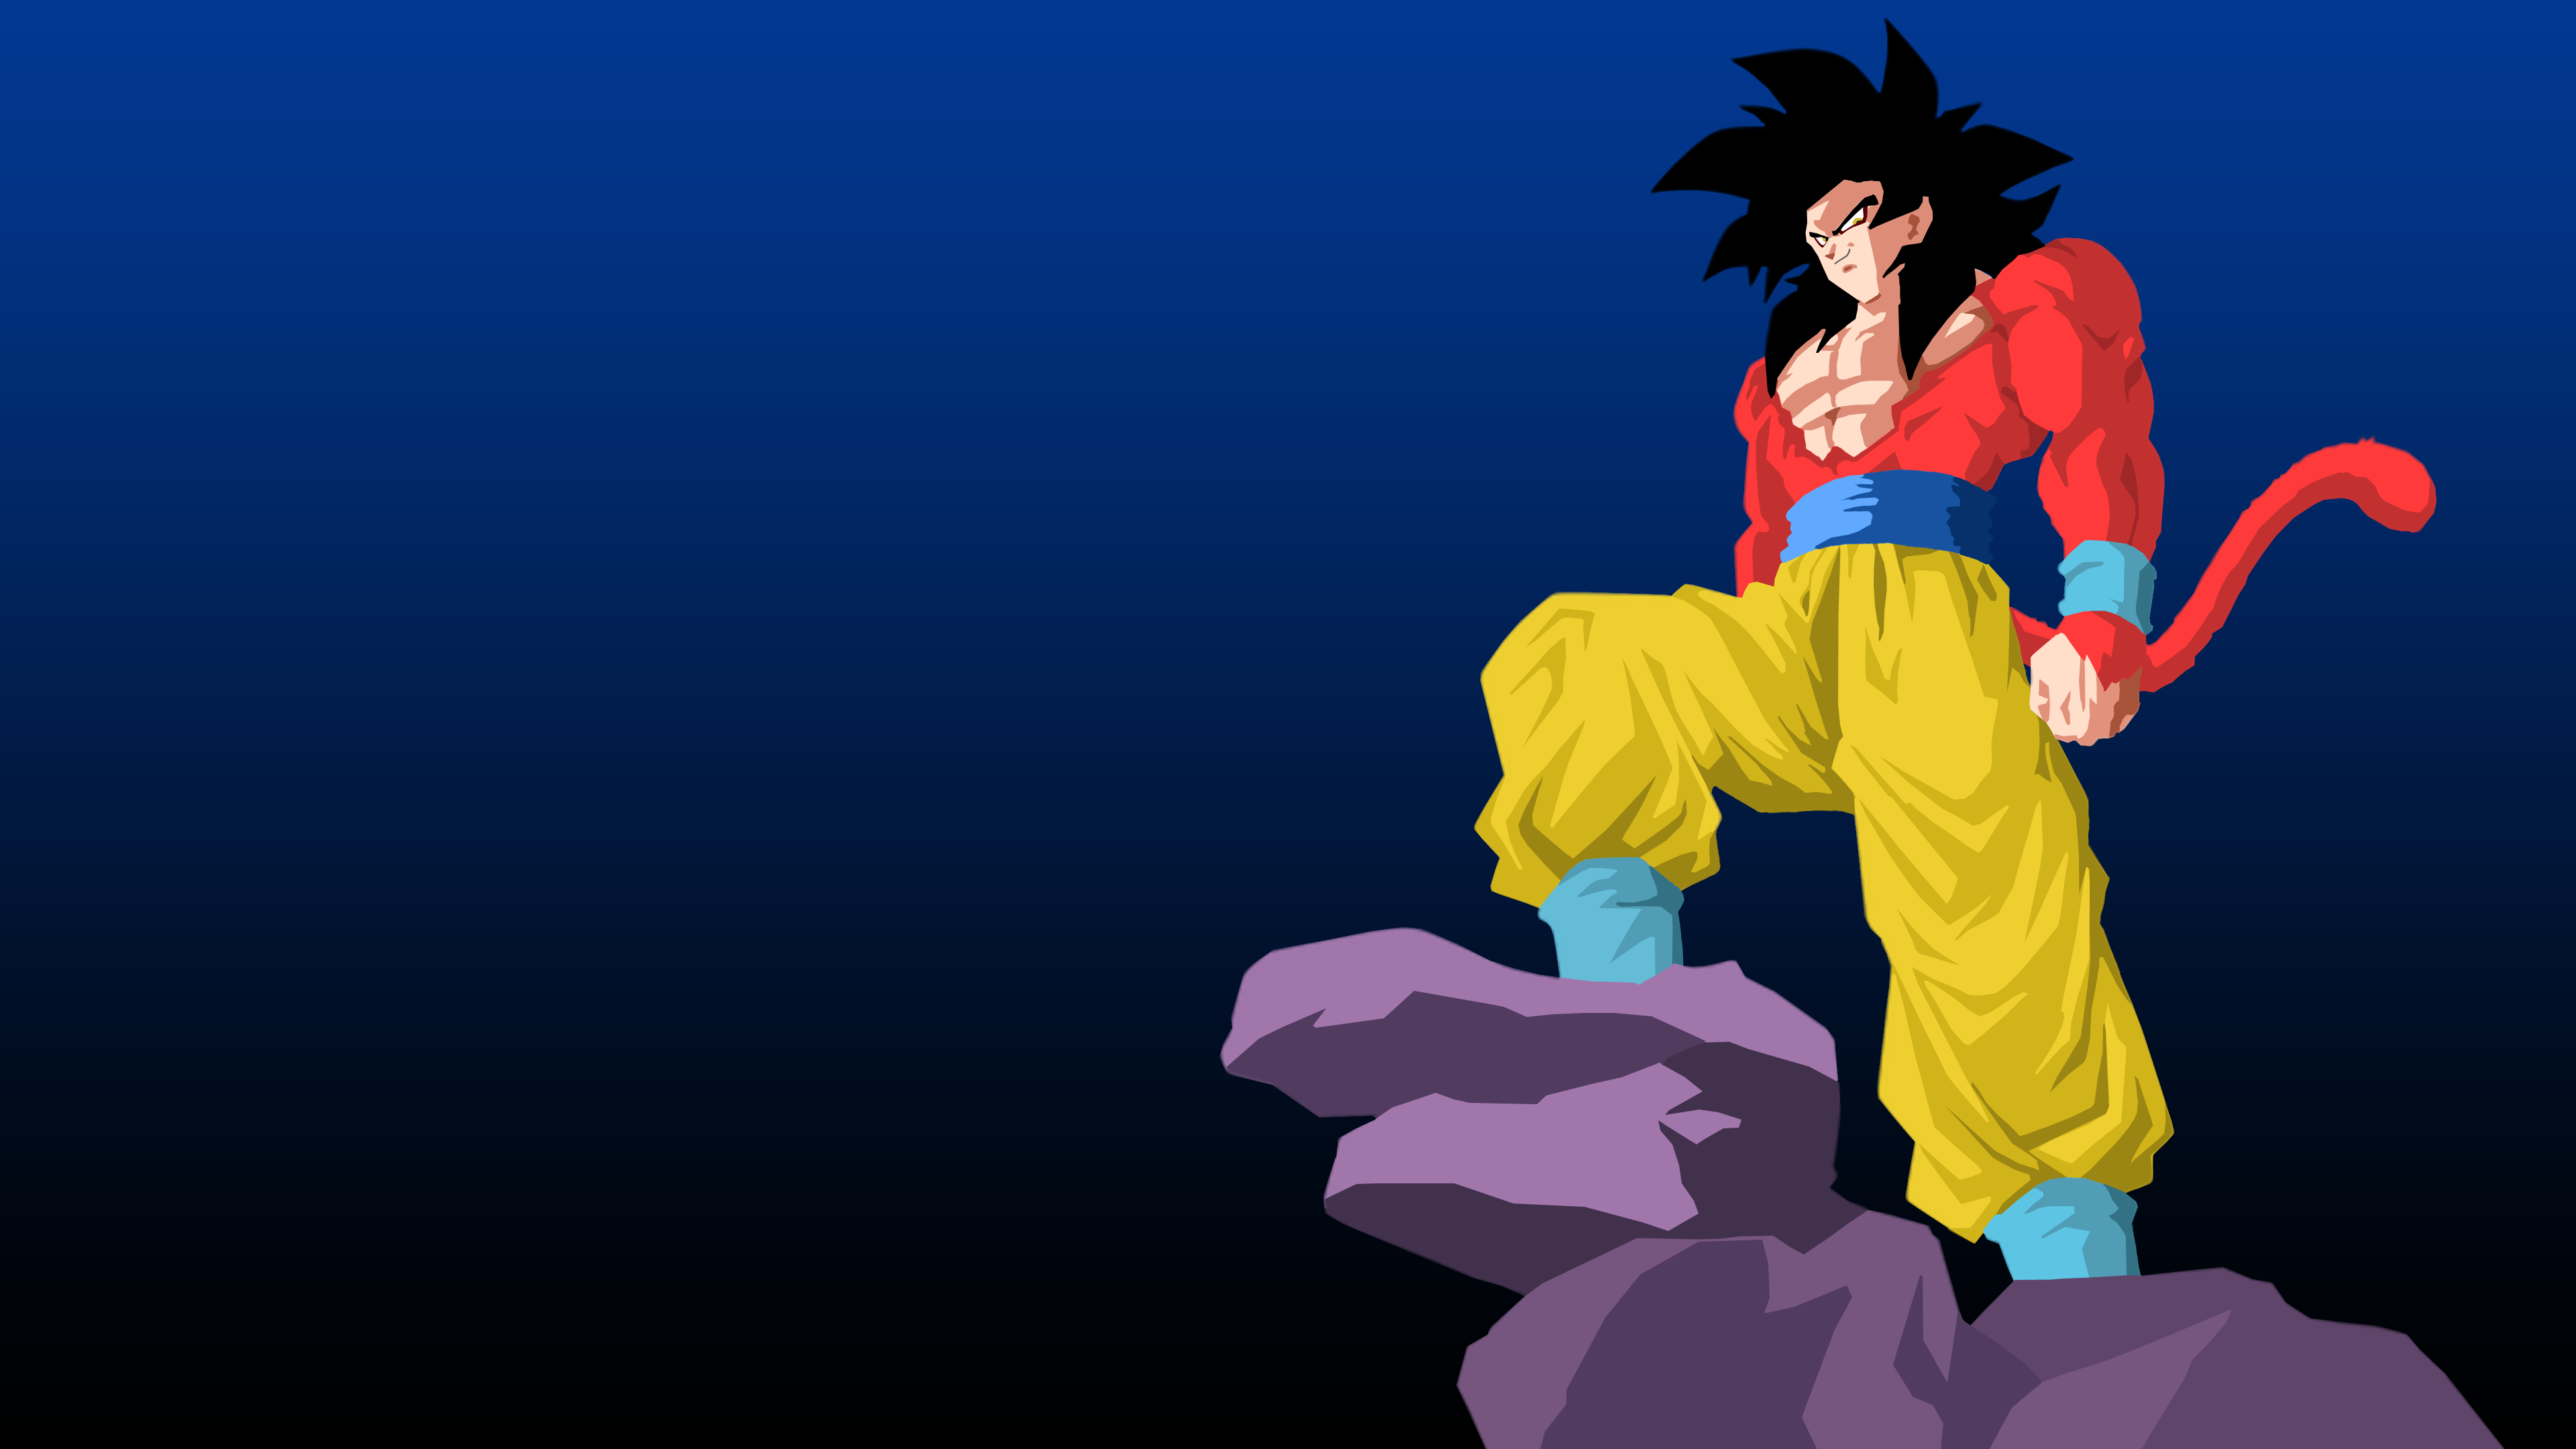 Just finished this SSJ4 Goku 4K wallpaper. I think it came out